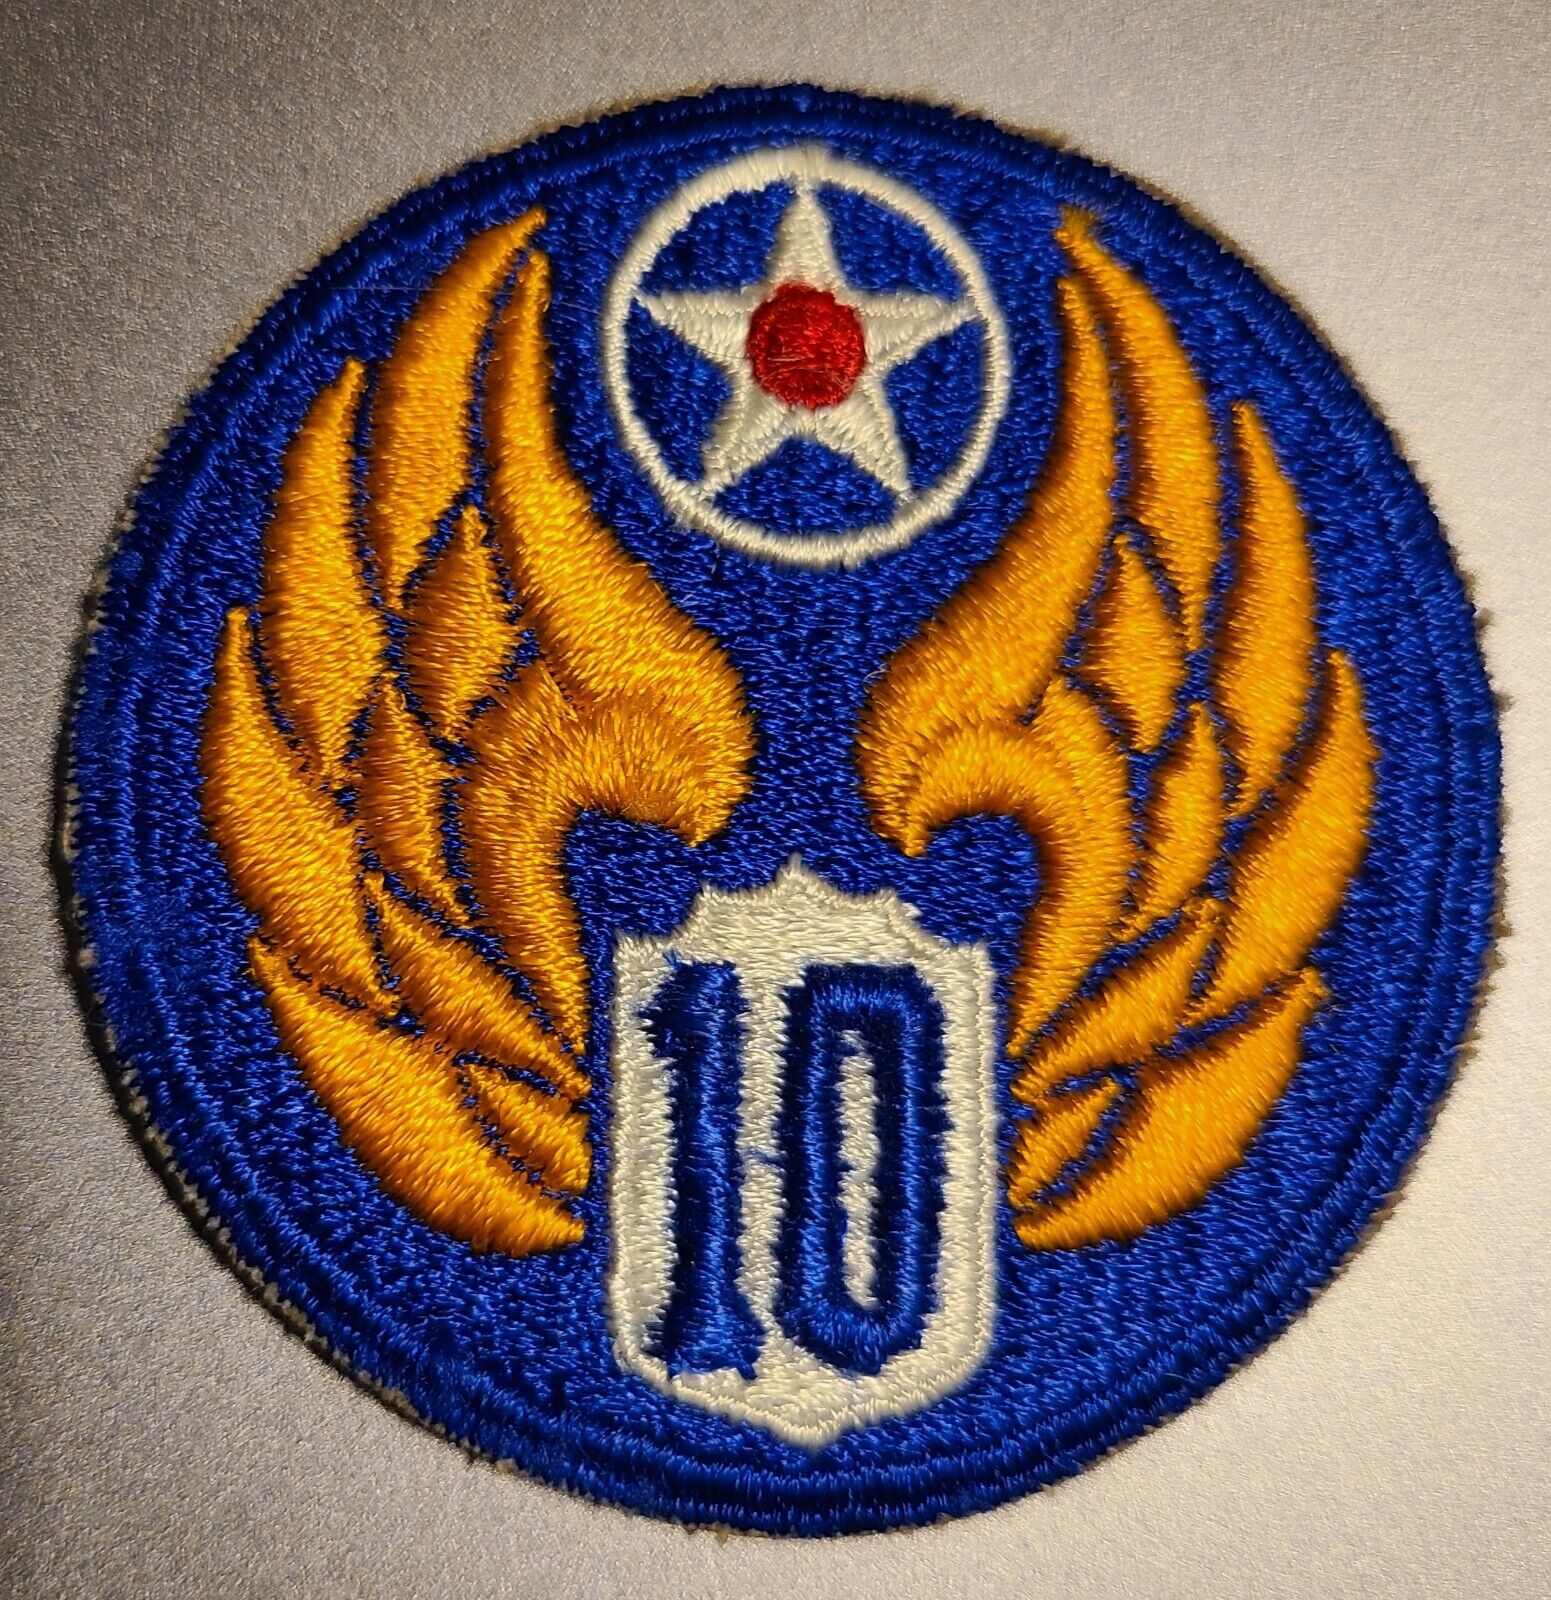 Original Period WWII US Army Air Corps Patch 10th Air Force 10 AF USAAF WW2